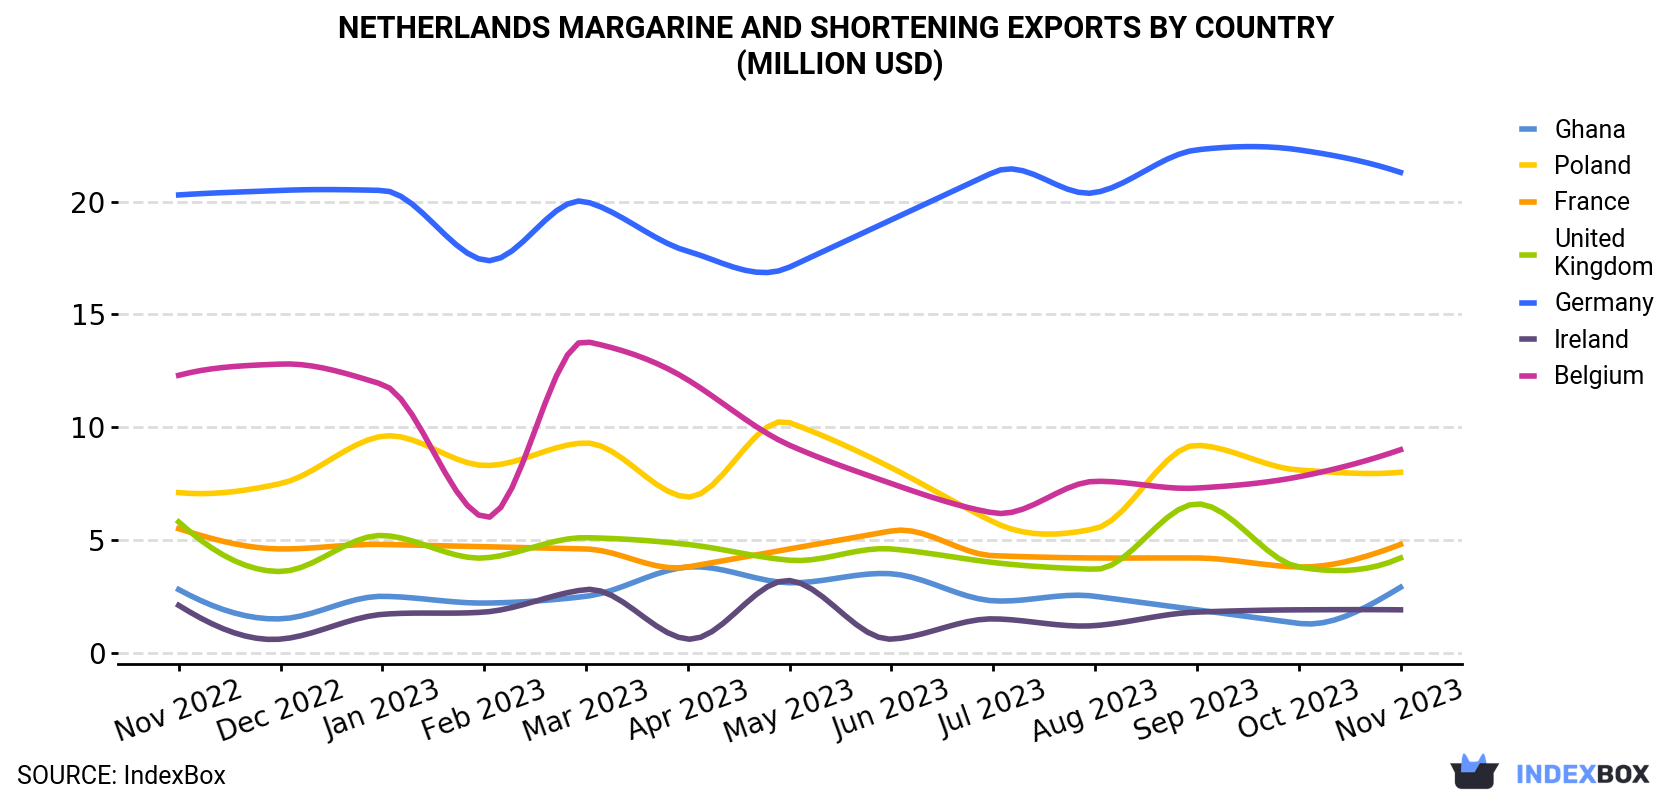 Netherlands Margarine And Shortening Exports By Country (Million USD)